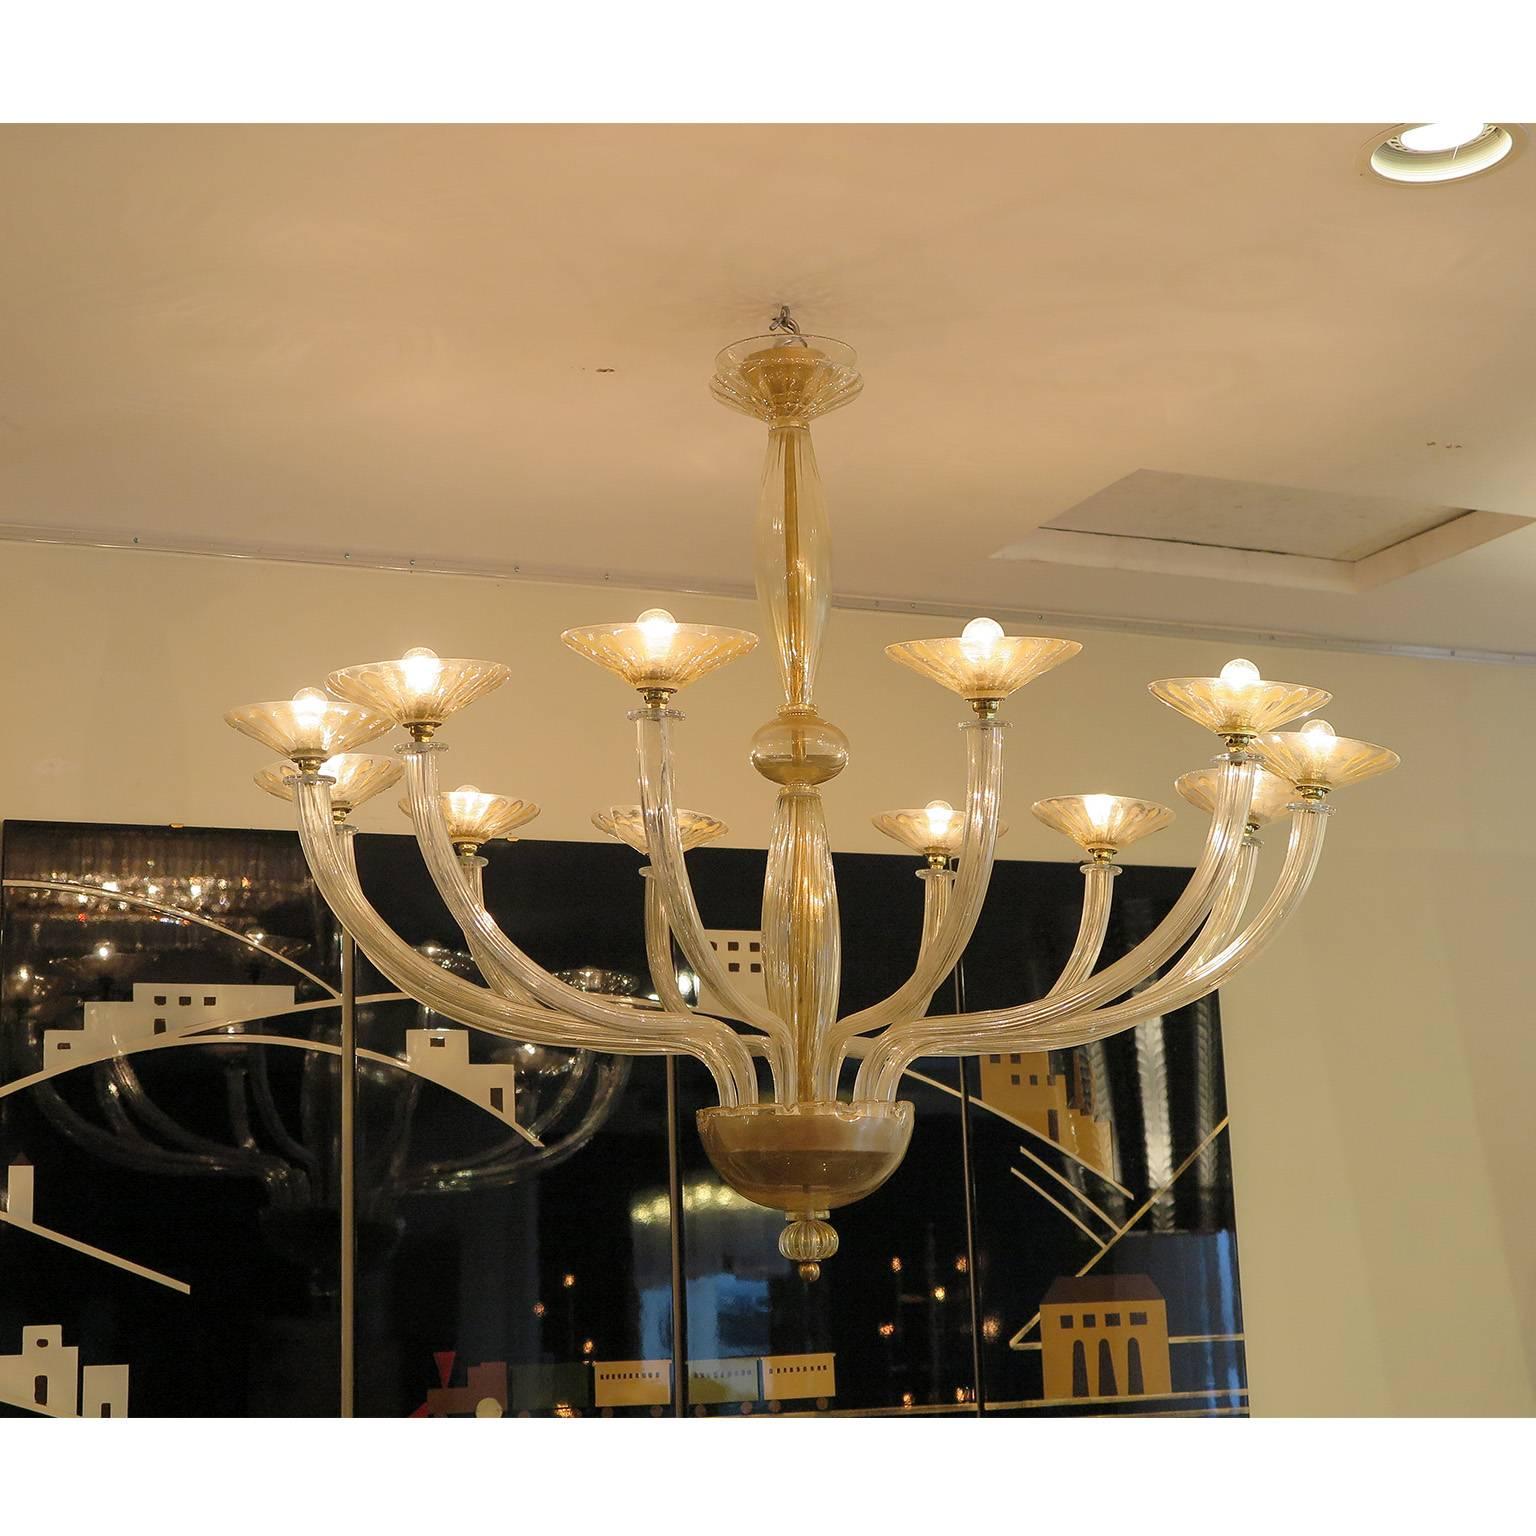 Stunning Murano glass chandelier from Italy, circa 1960s-1970s. Features 12 curved arms with handblown opaque glass with gold leaf details.